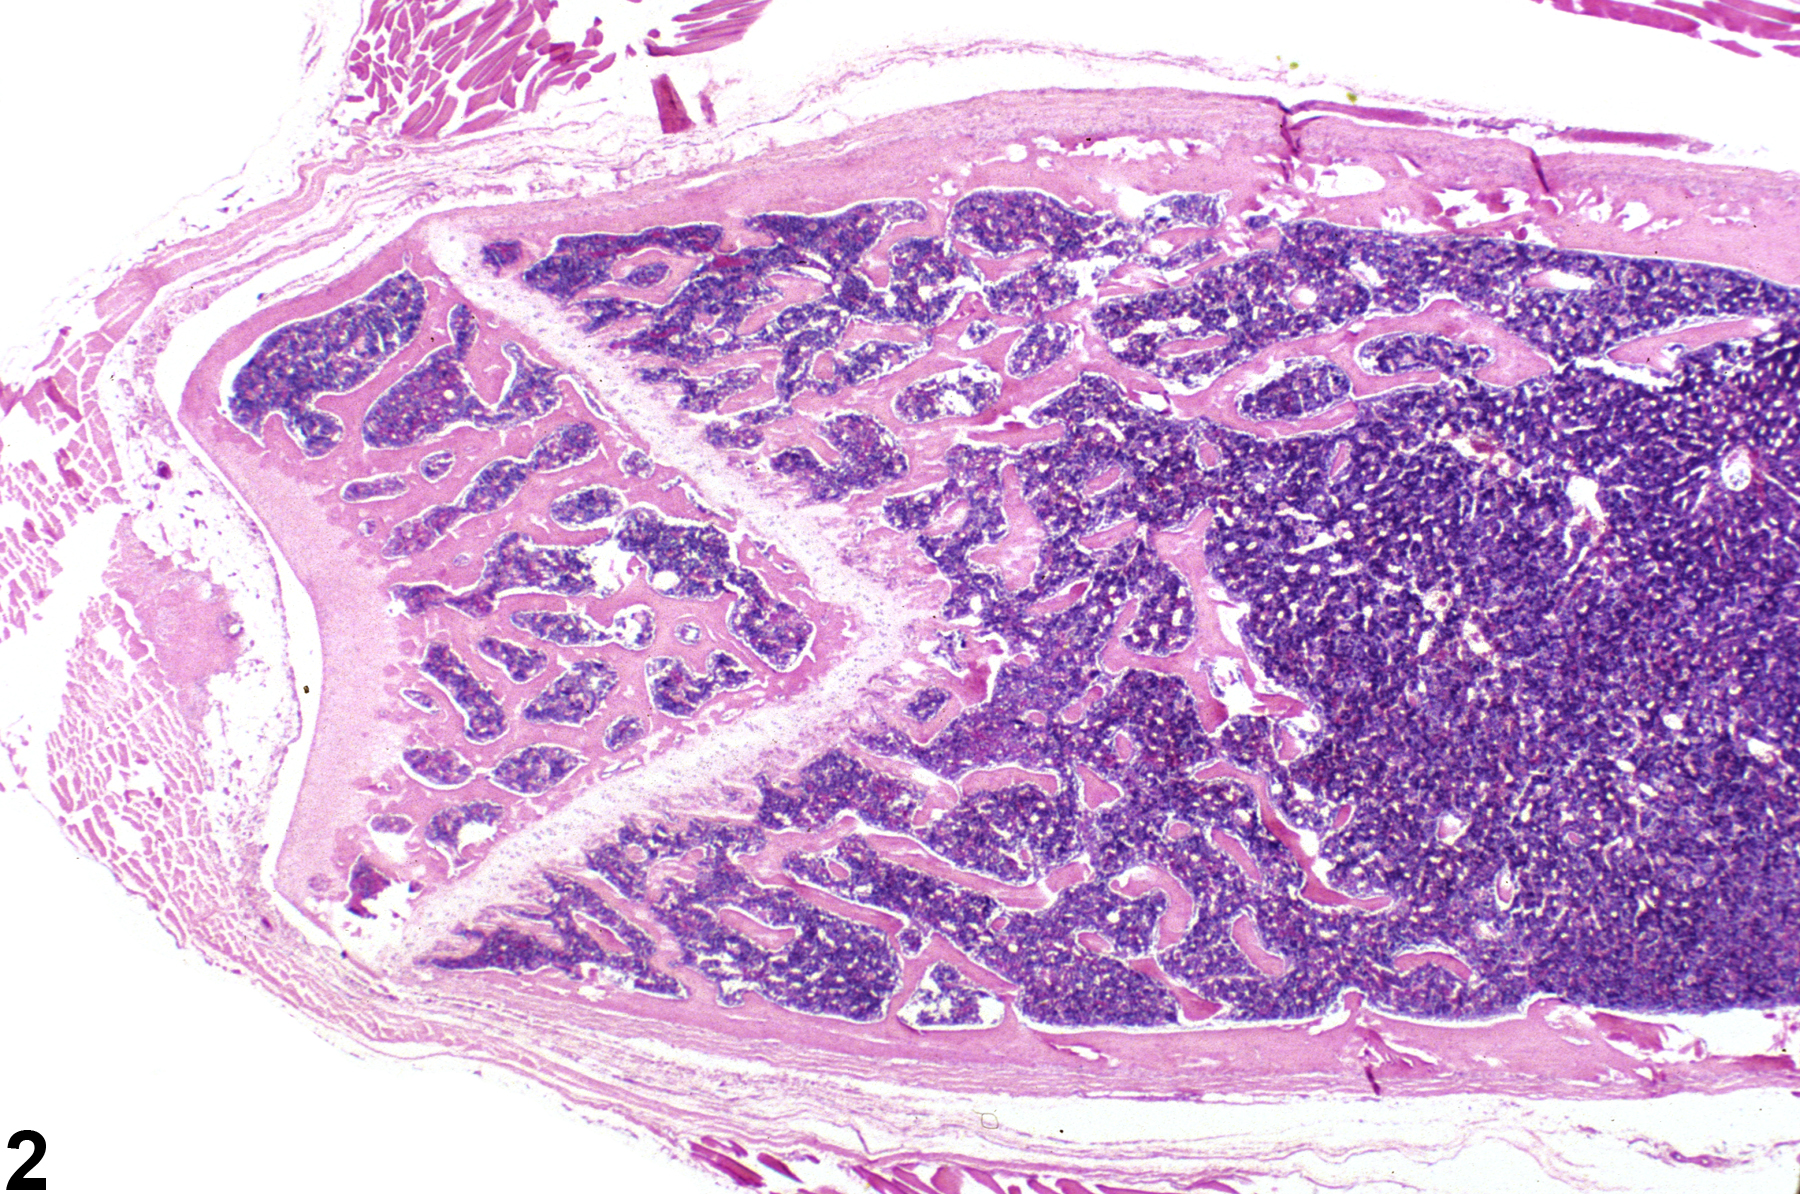 Image of hypercellularity in the bone marrow from a female F344/N rat in a subchronic study